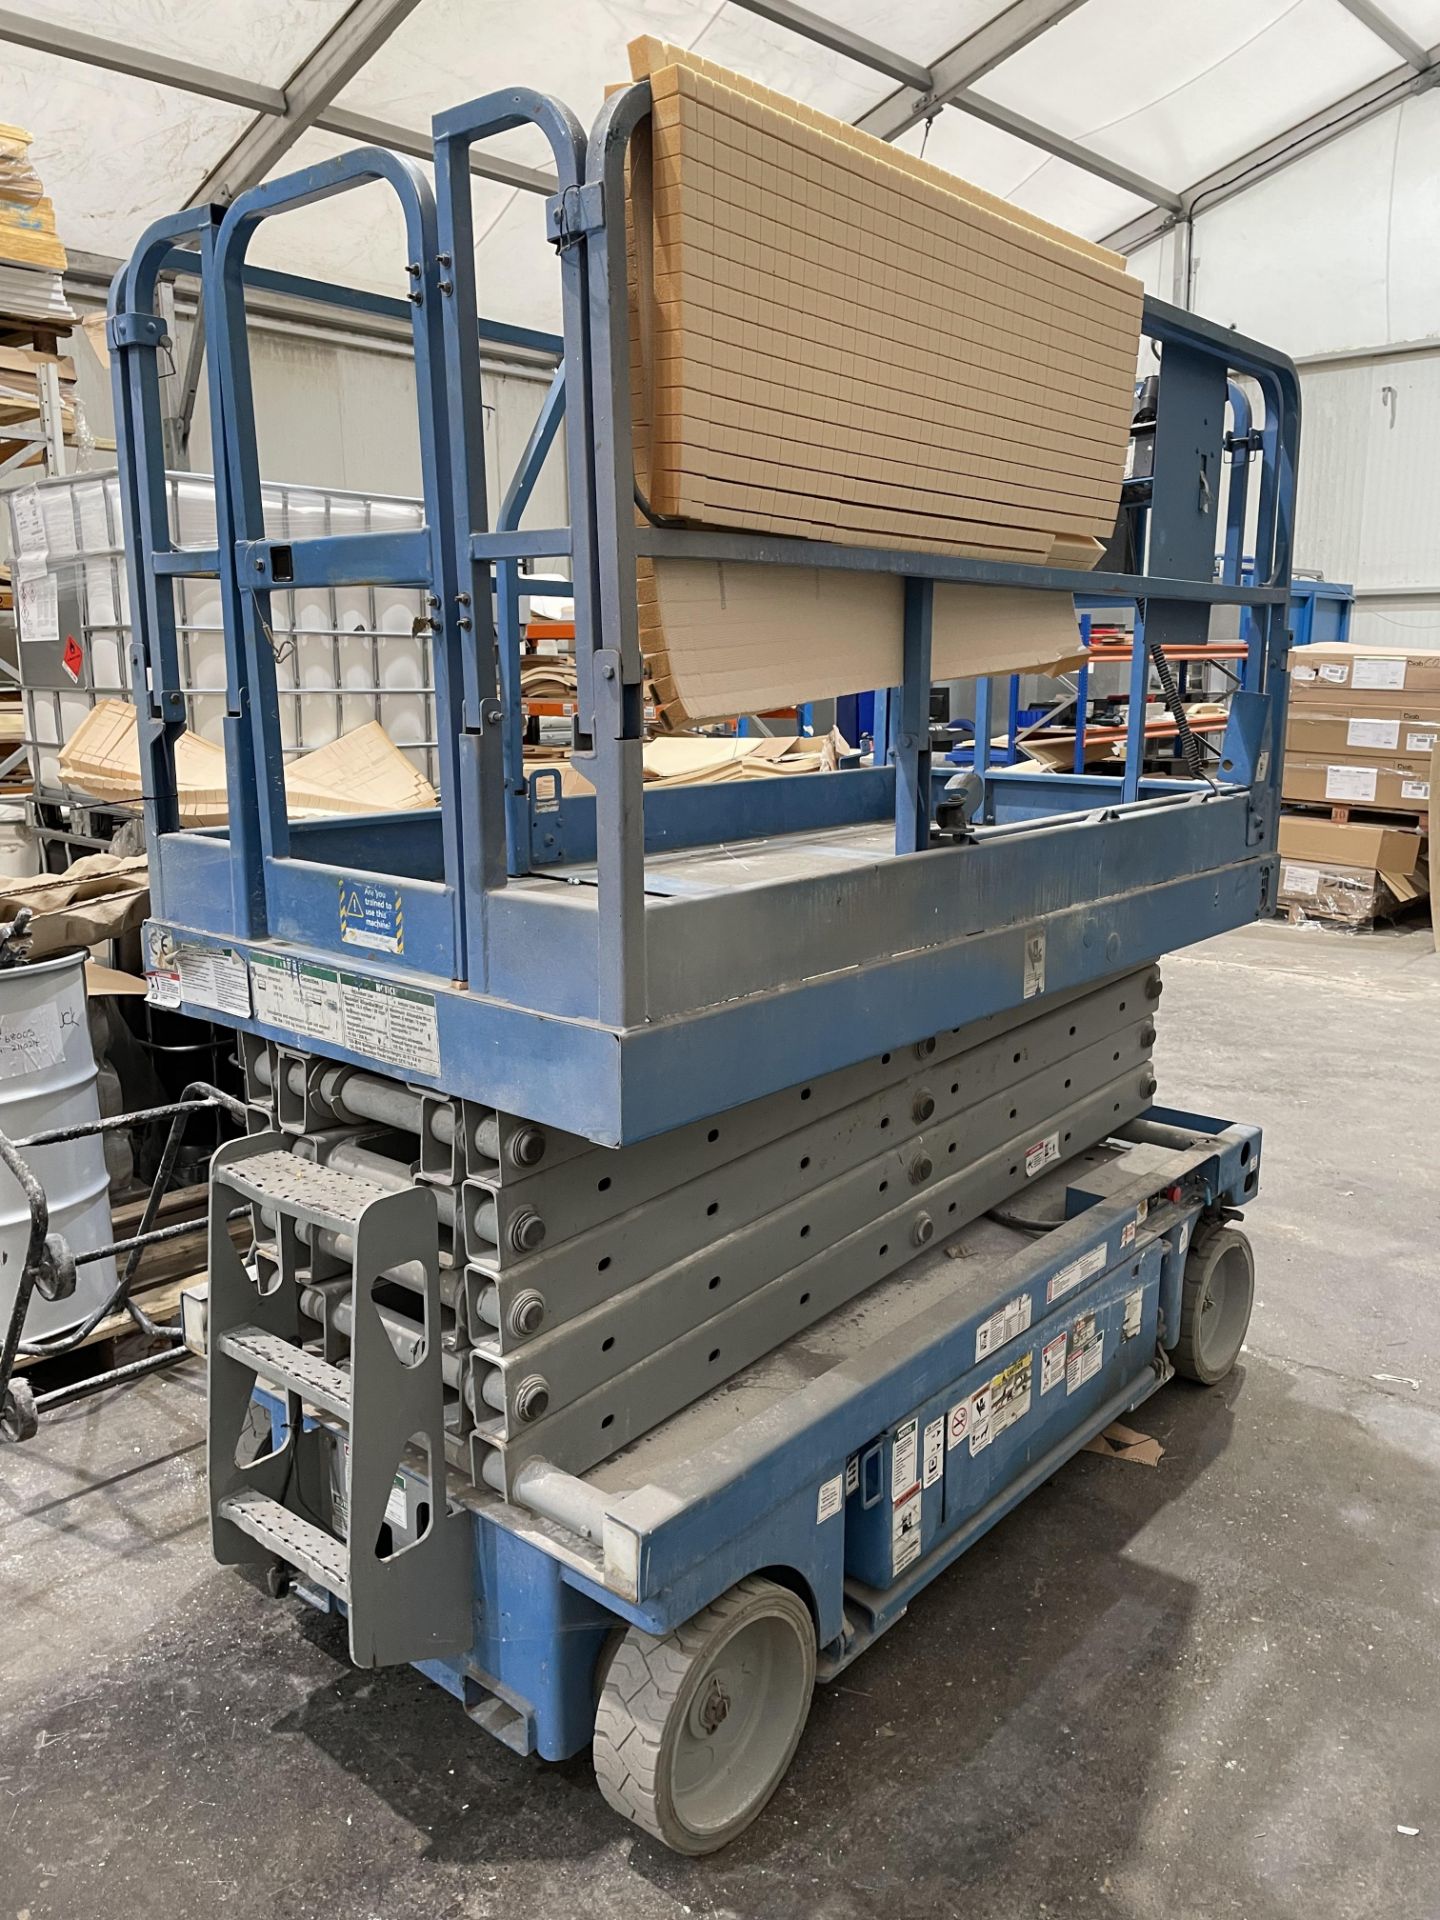 Genie GS-3246 Electric Scissor Lift, 11.75m Working Height, Run Hours: 699, S/No. GS46-48405 - Image 2 of 8